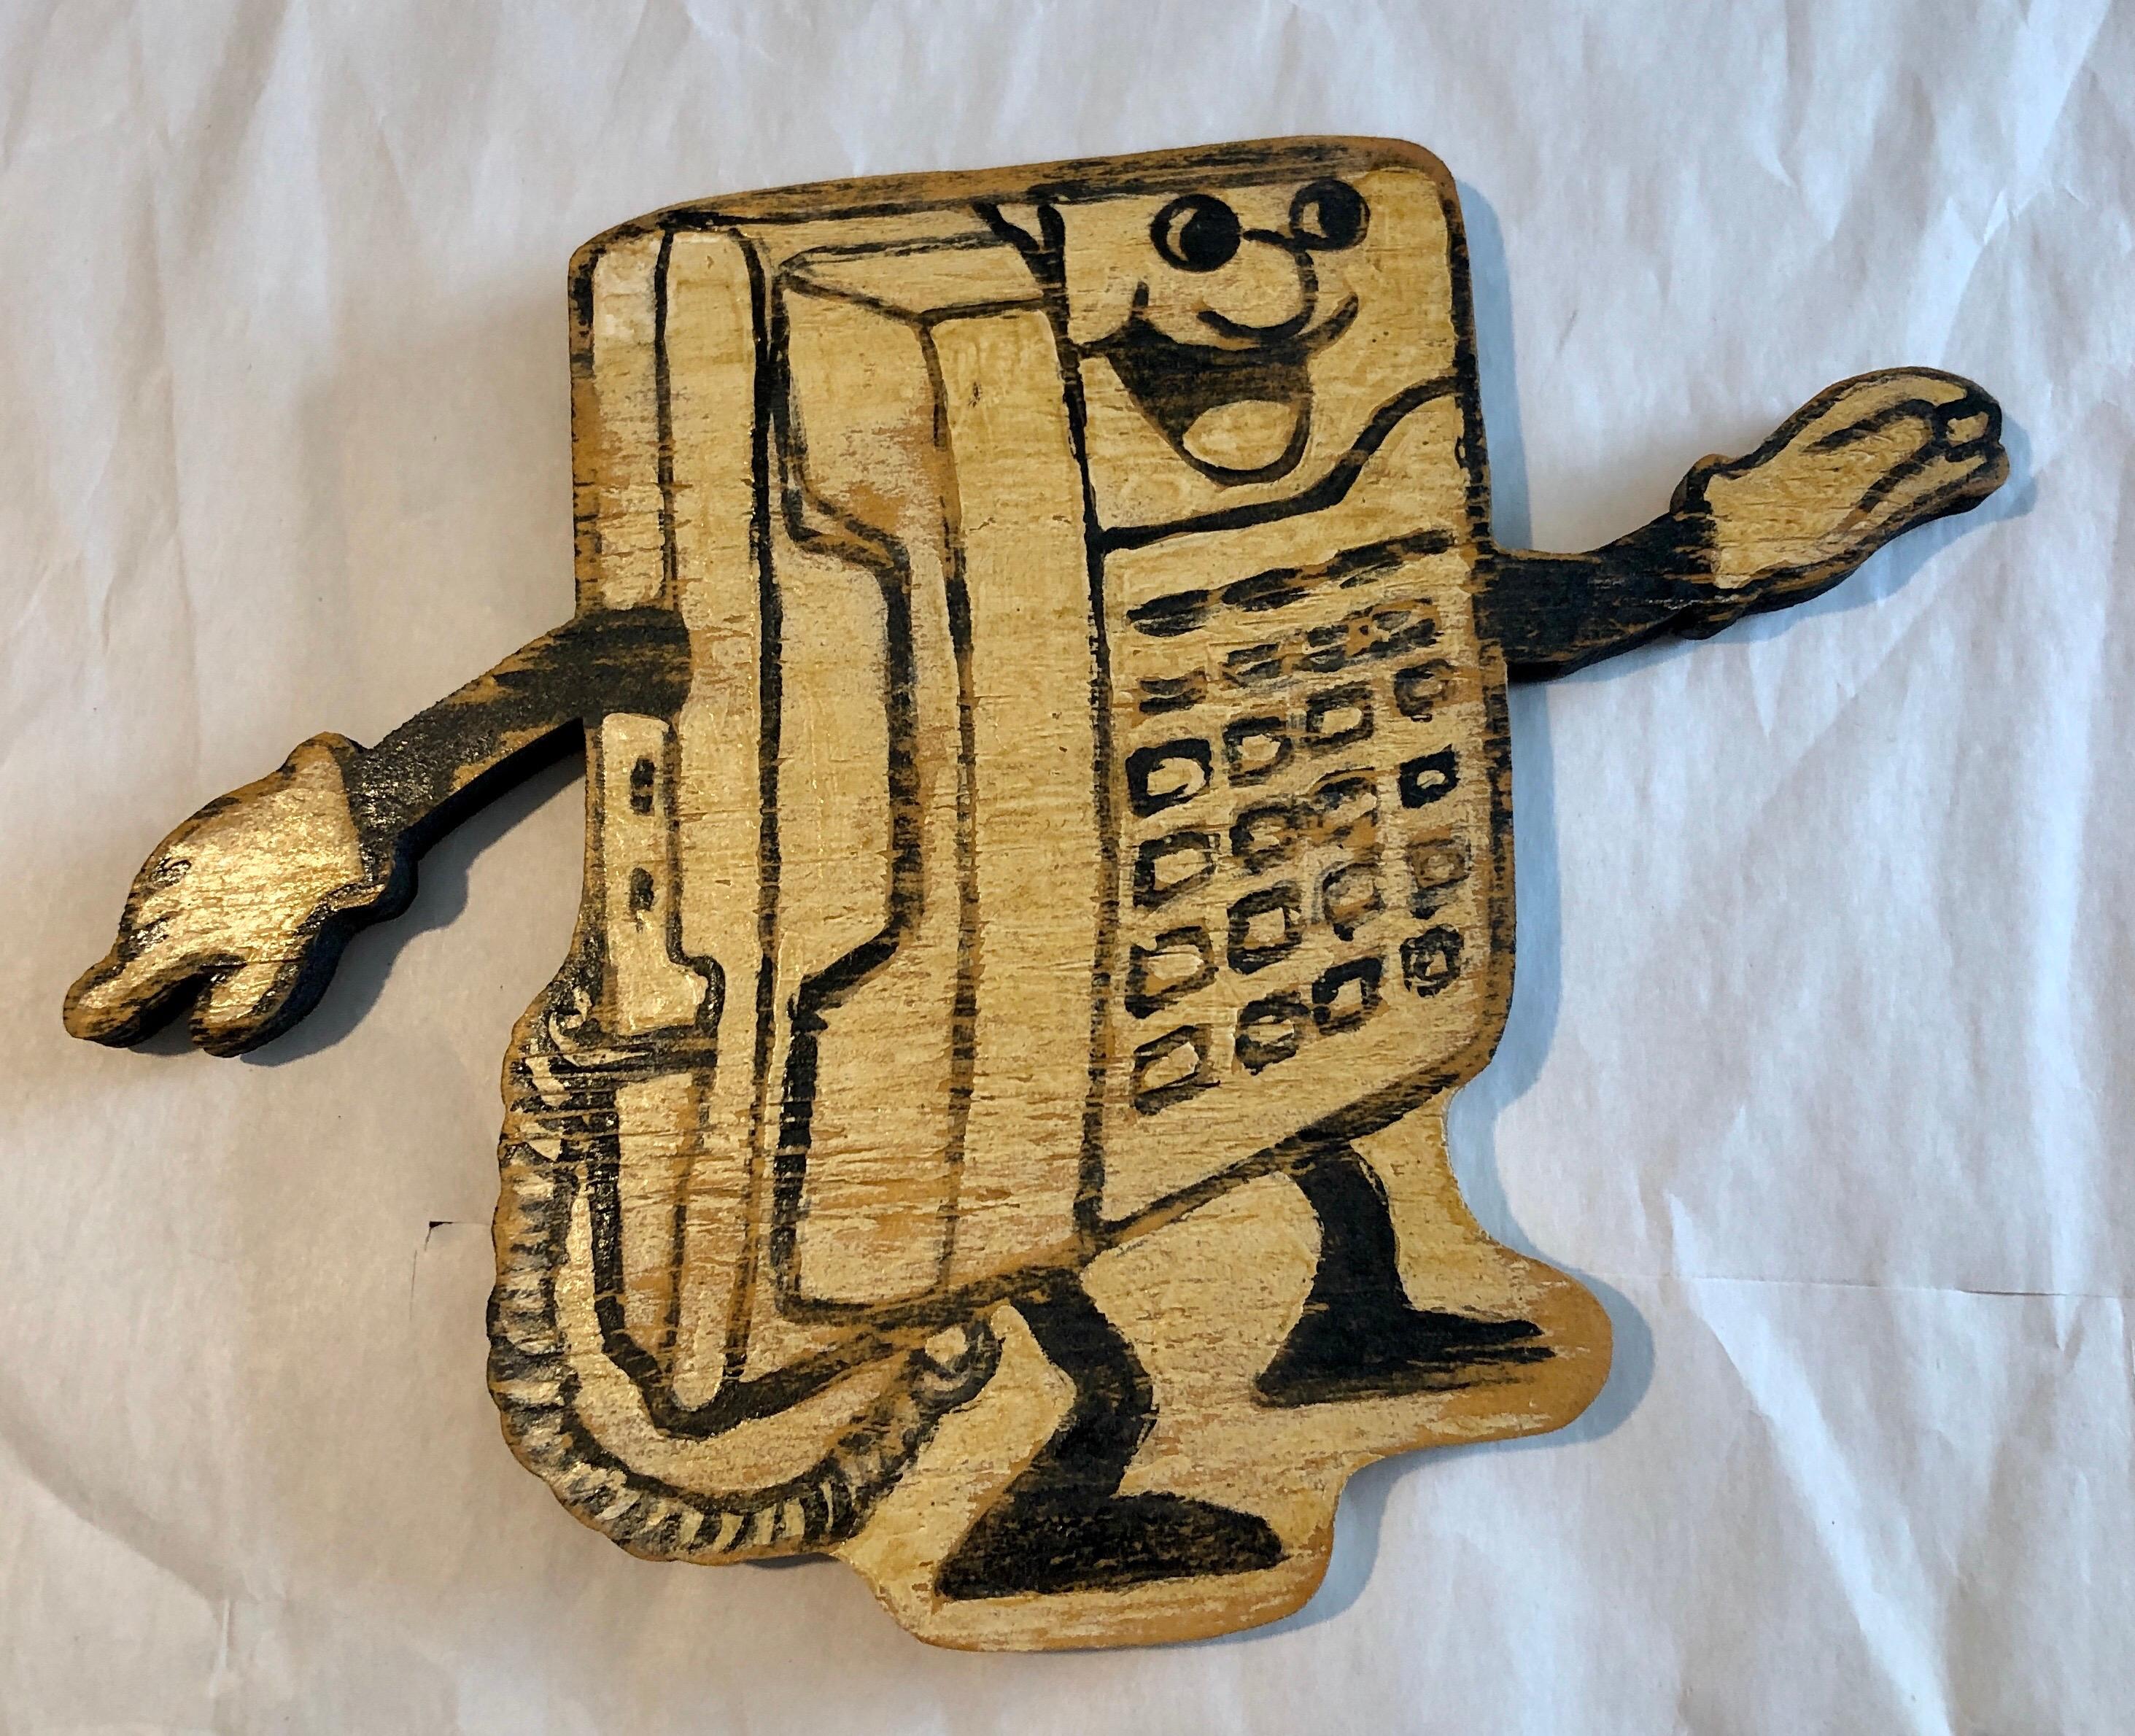 Carved Wood Neo Pop Art Painting Sculpture New Orleans Wall Hanging Skylar Fein For Sale 3